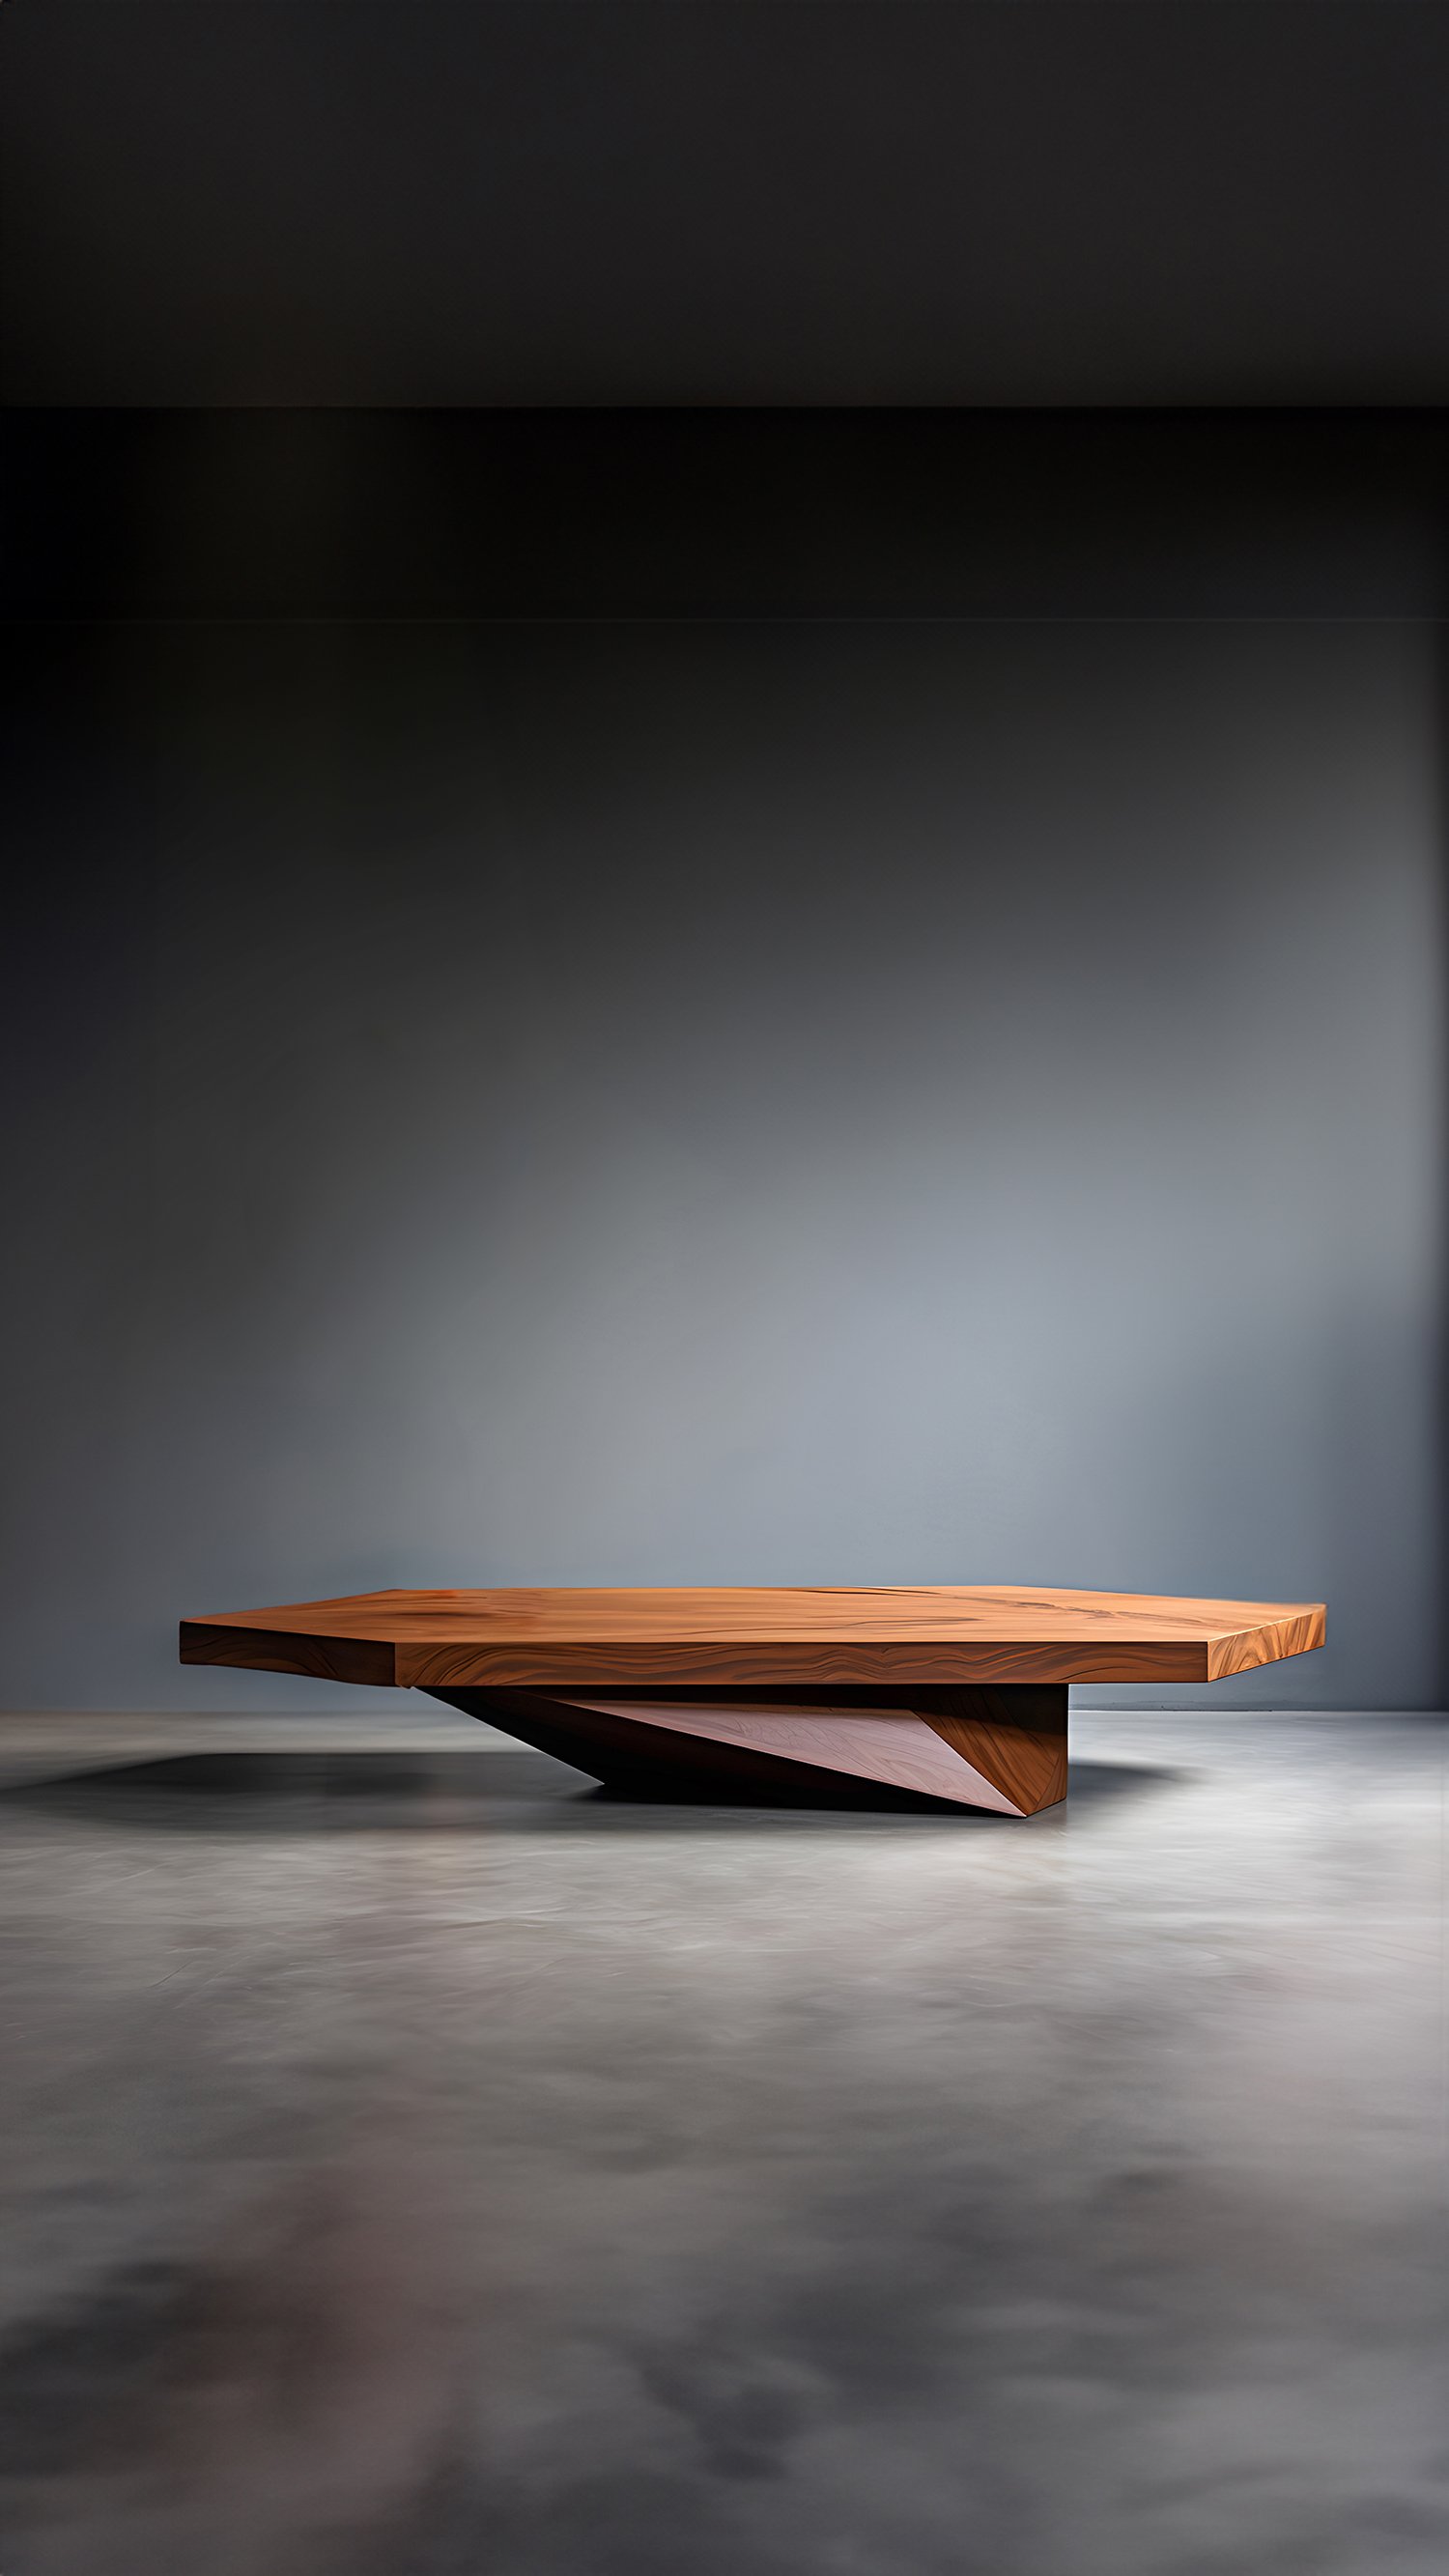 Sculptural Coffee Table Made of Solid Wood, Center Table Solace S20 by Joel Escalona — 7.jpg